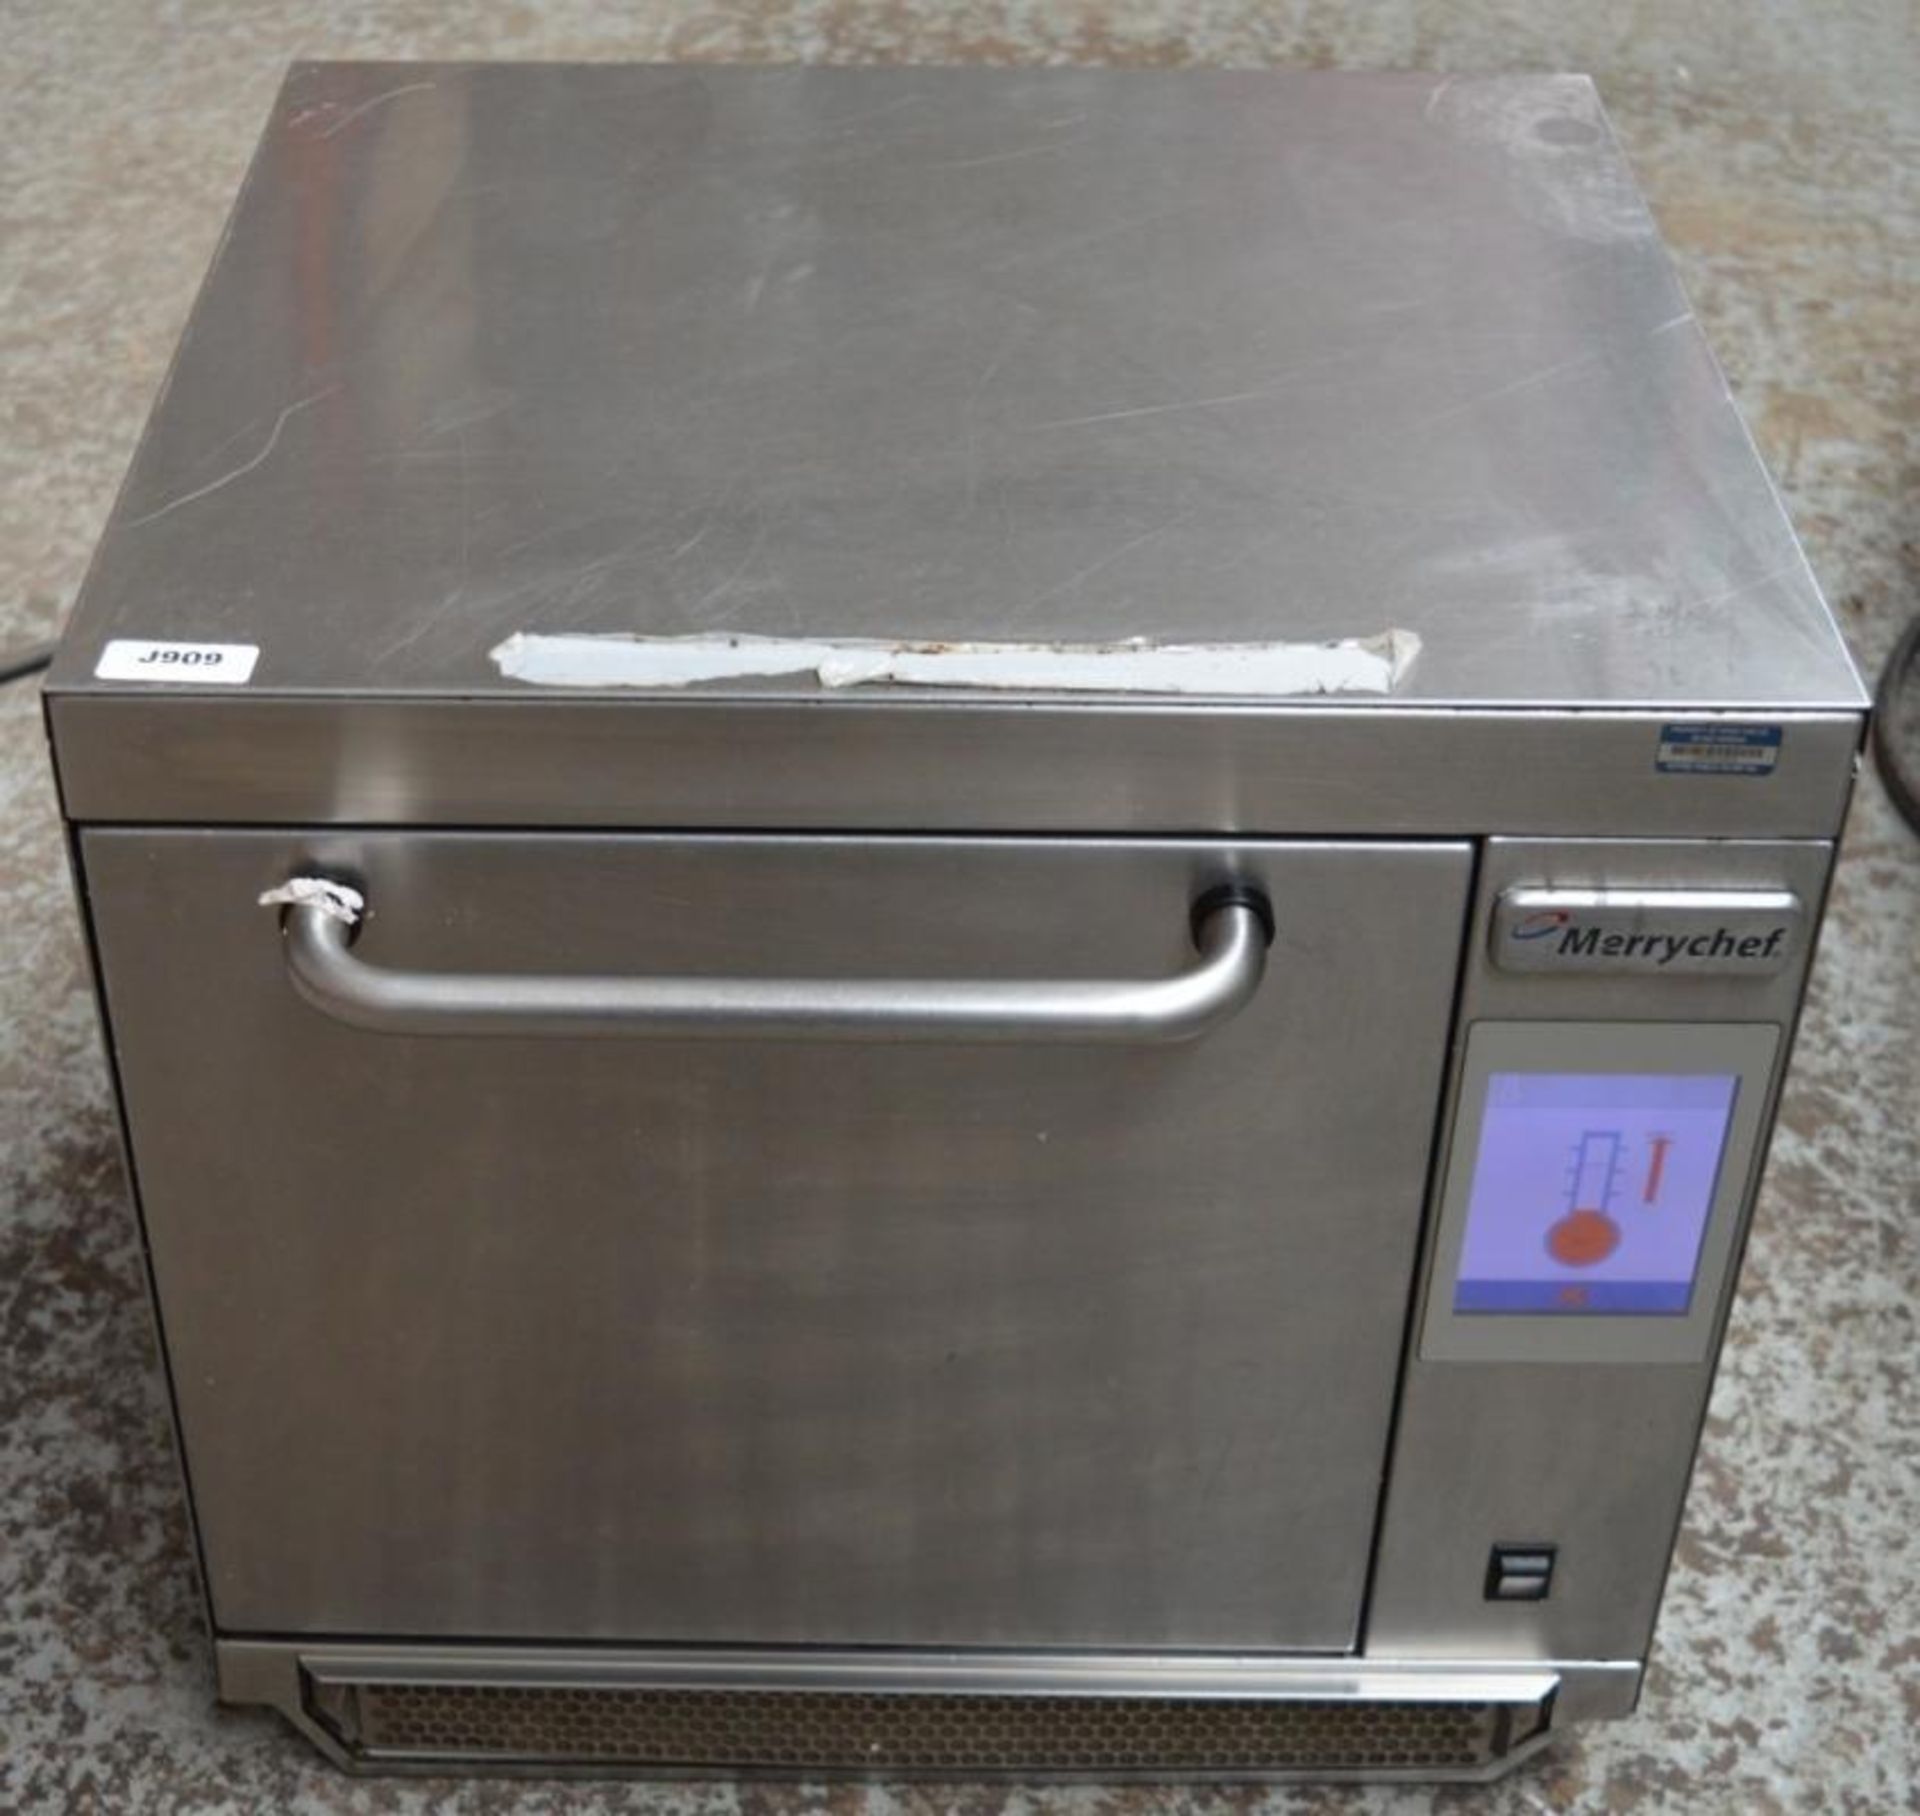 1 x Merrychef Eikon 3 Combination Microwave Oven Features 700w Microwave Output, 3.0kw Convection Ov - Image 7 of 10